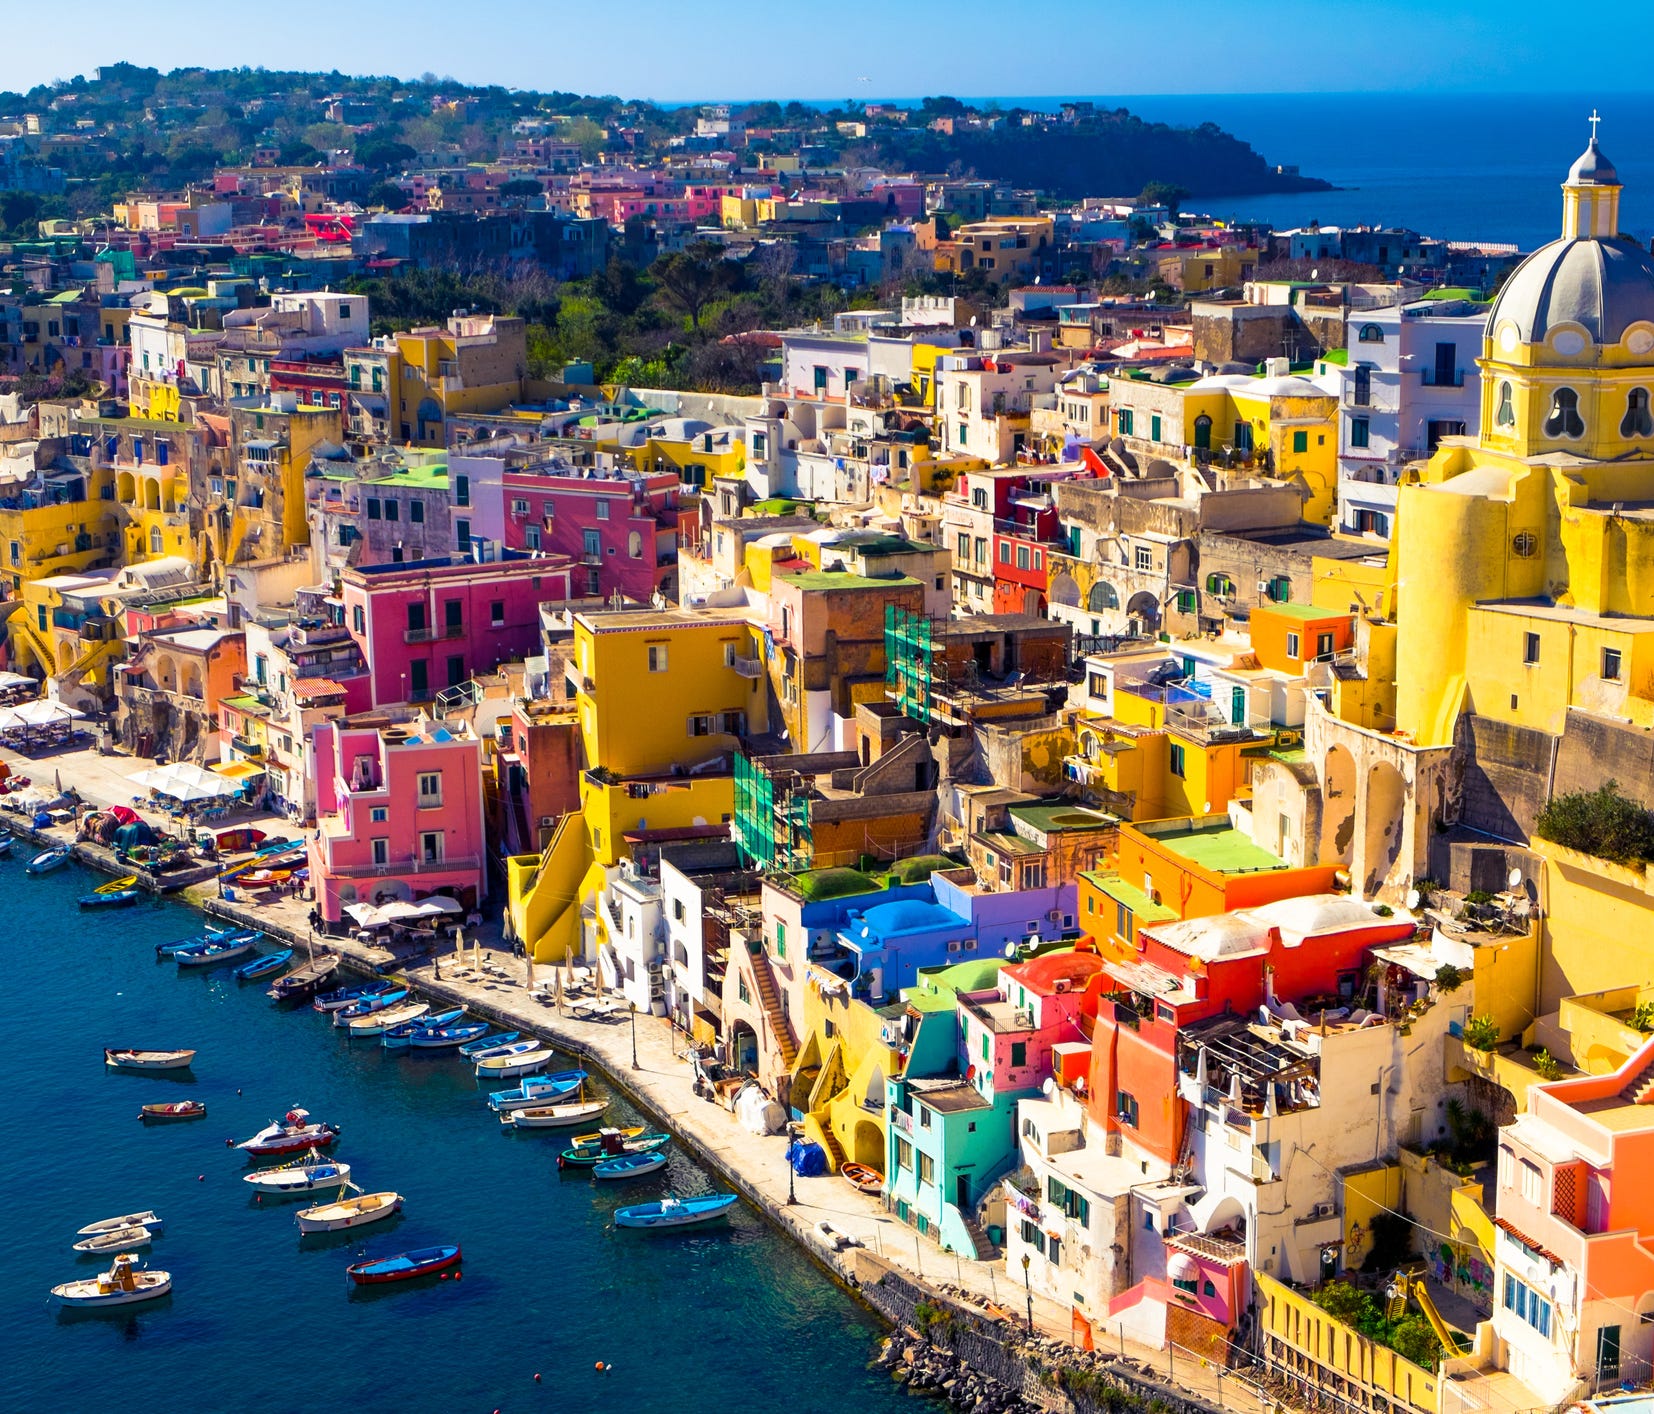 Procida, Campania: Encompassing just 1.6 square miles, Procida is the smallest island in the Bay of Naples, and visitors often bypass it in their rush to see nearby Capri and Ischia. But if you prefer your villages in Italy sans crowds, consider hopp